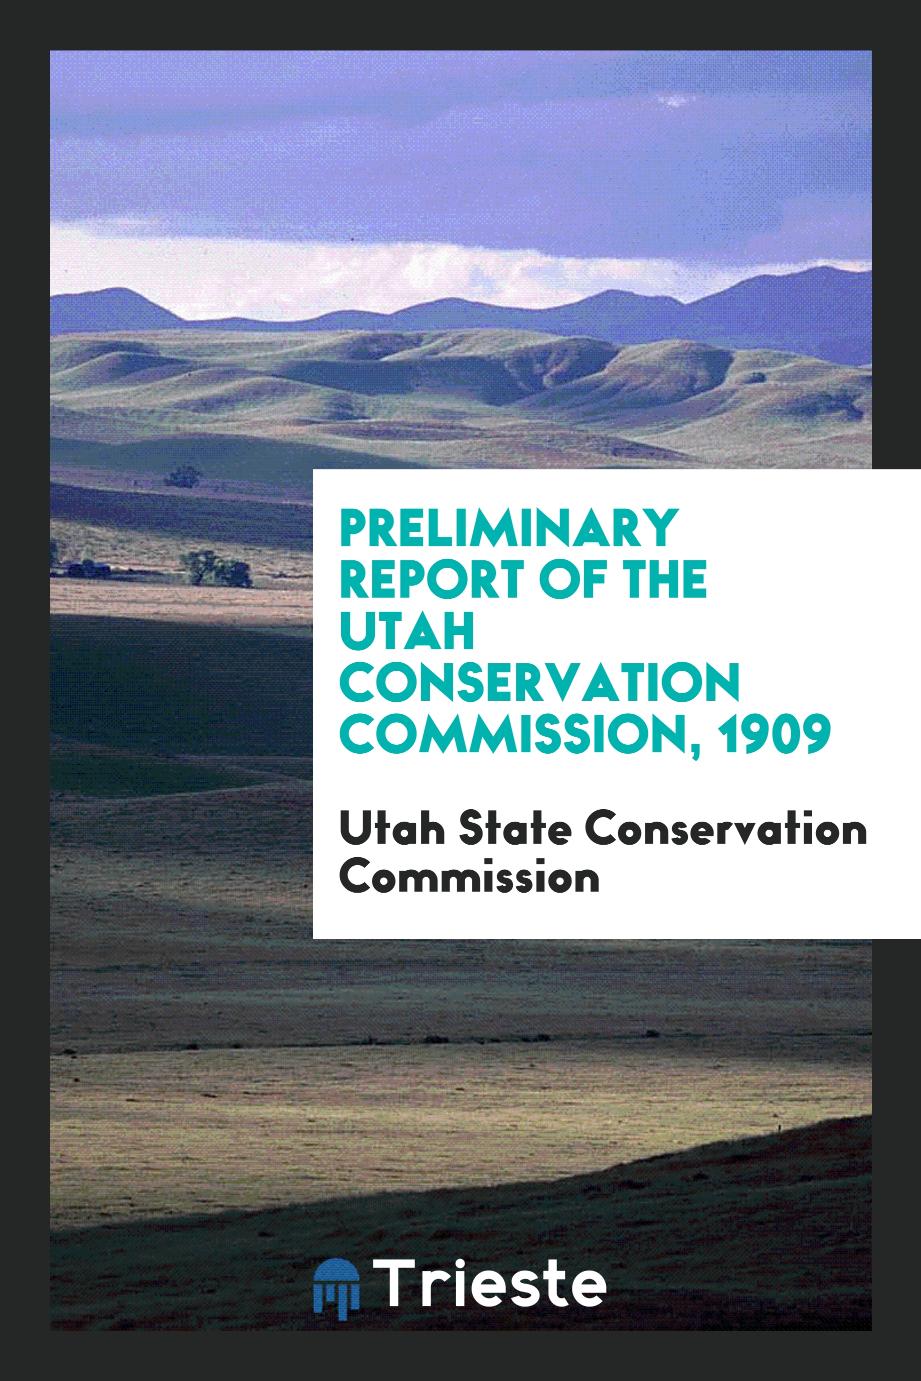 Preliminary Report of the Utah Conservation Commission, 1909